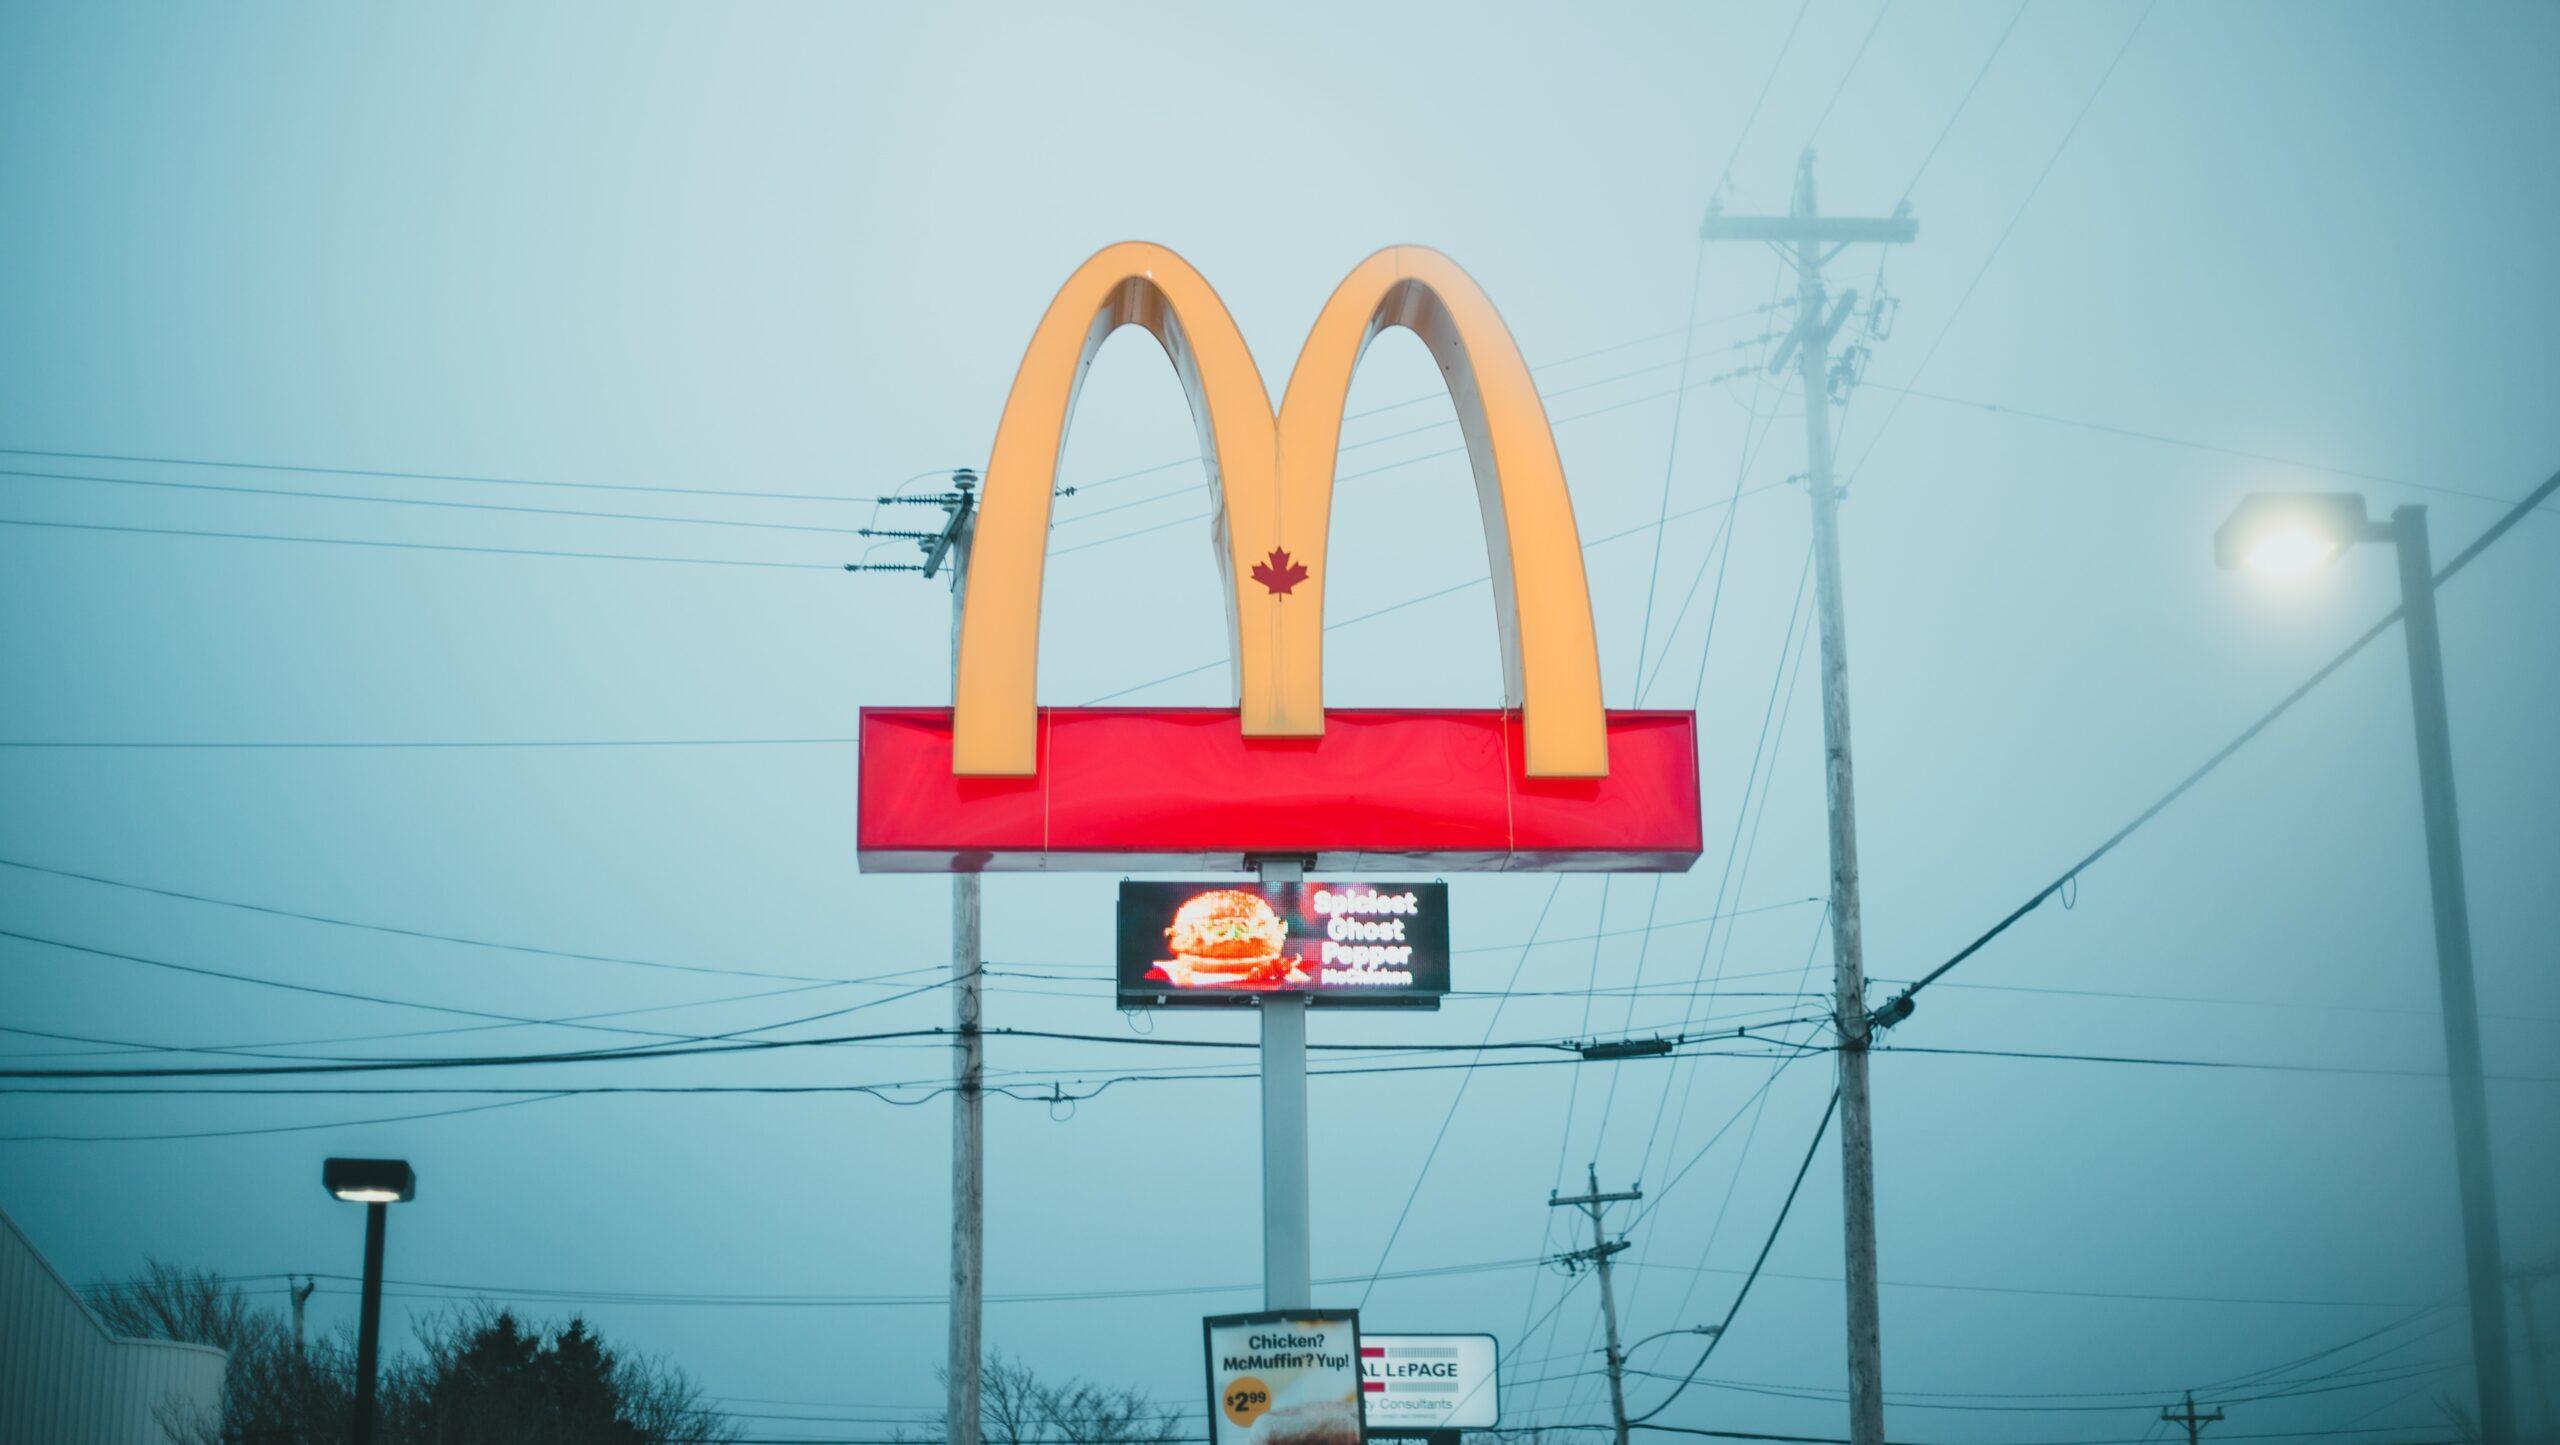 The 'golden arches' of a McDonald's restaurant against a foggy background. 